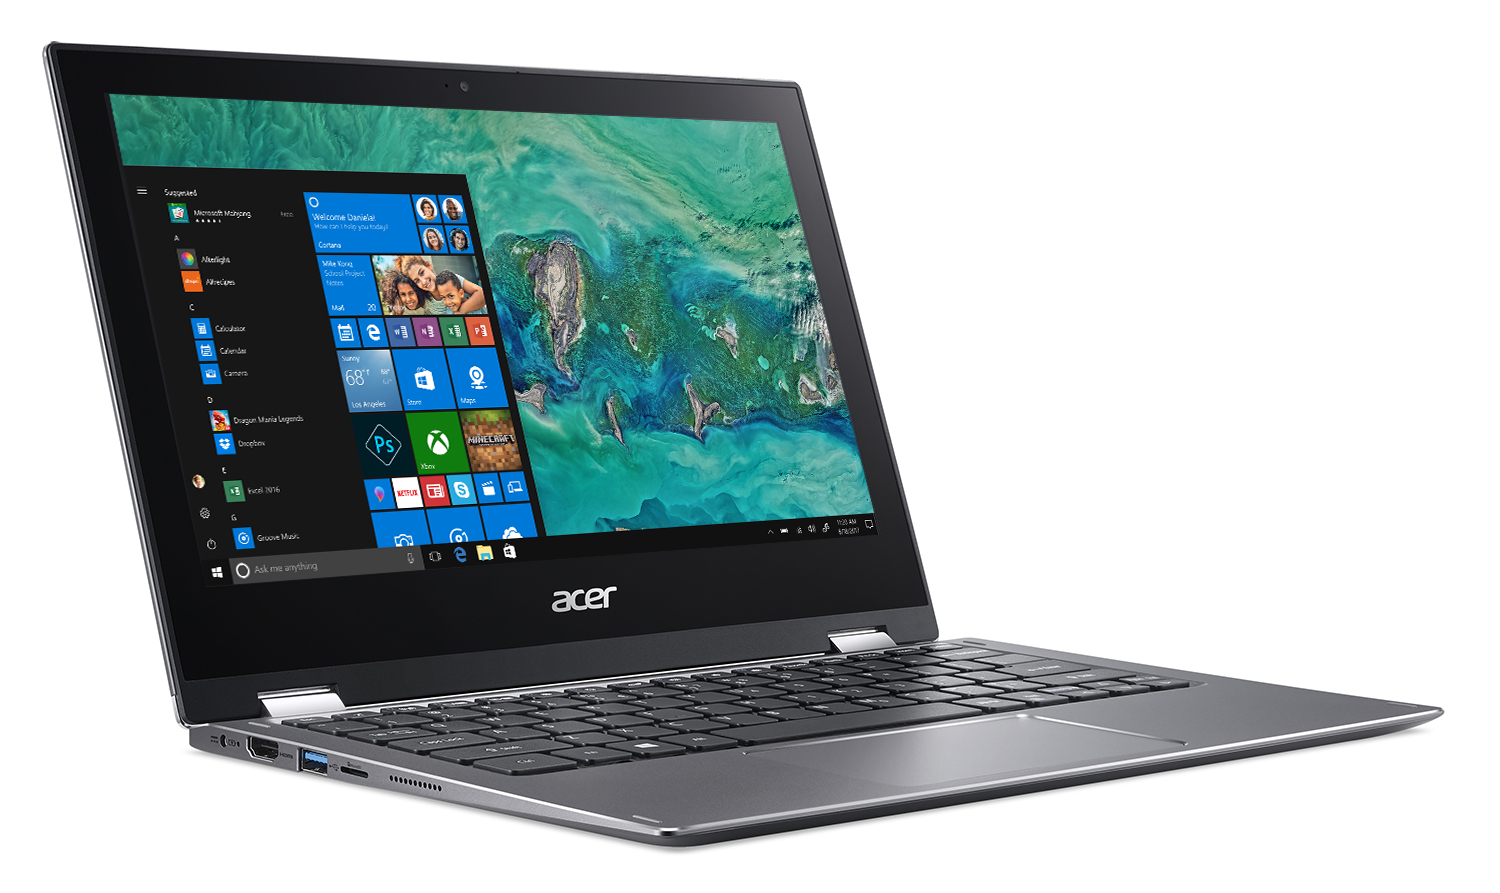 Acer Spin 1 , 11.6" Full HD Touch Notebook, Intel Pentium N4200, Intel HD Graphics, 4GB, 64GB HDD, SP111-32N-P6CV (Google Classroom Compatible) - image 3 of 7